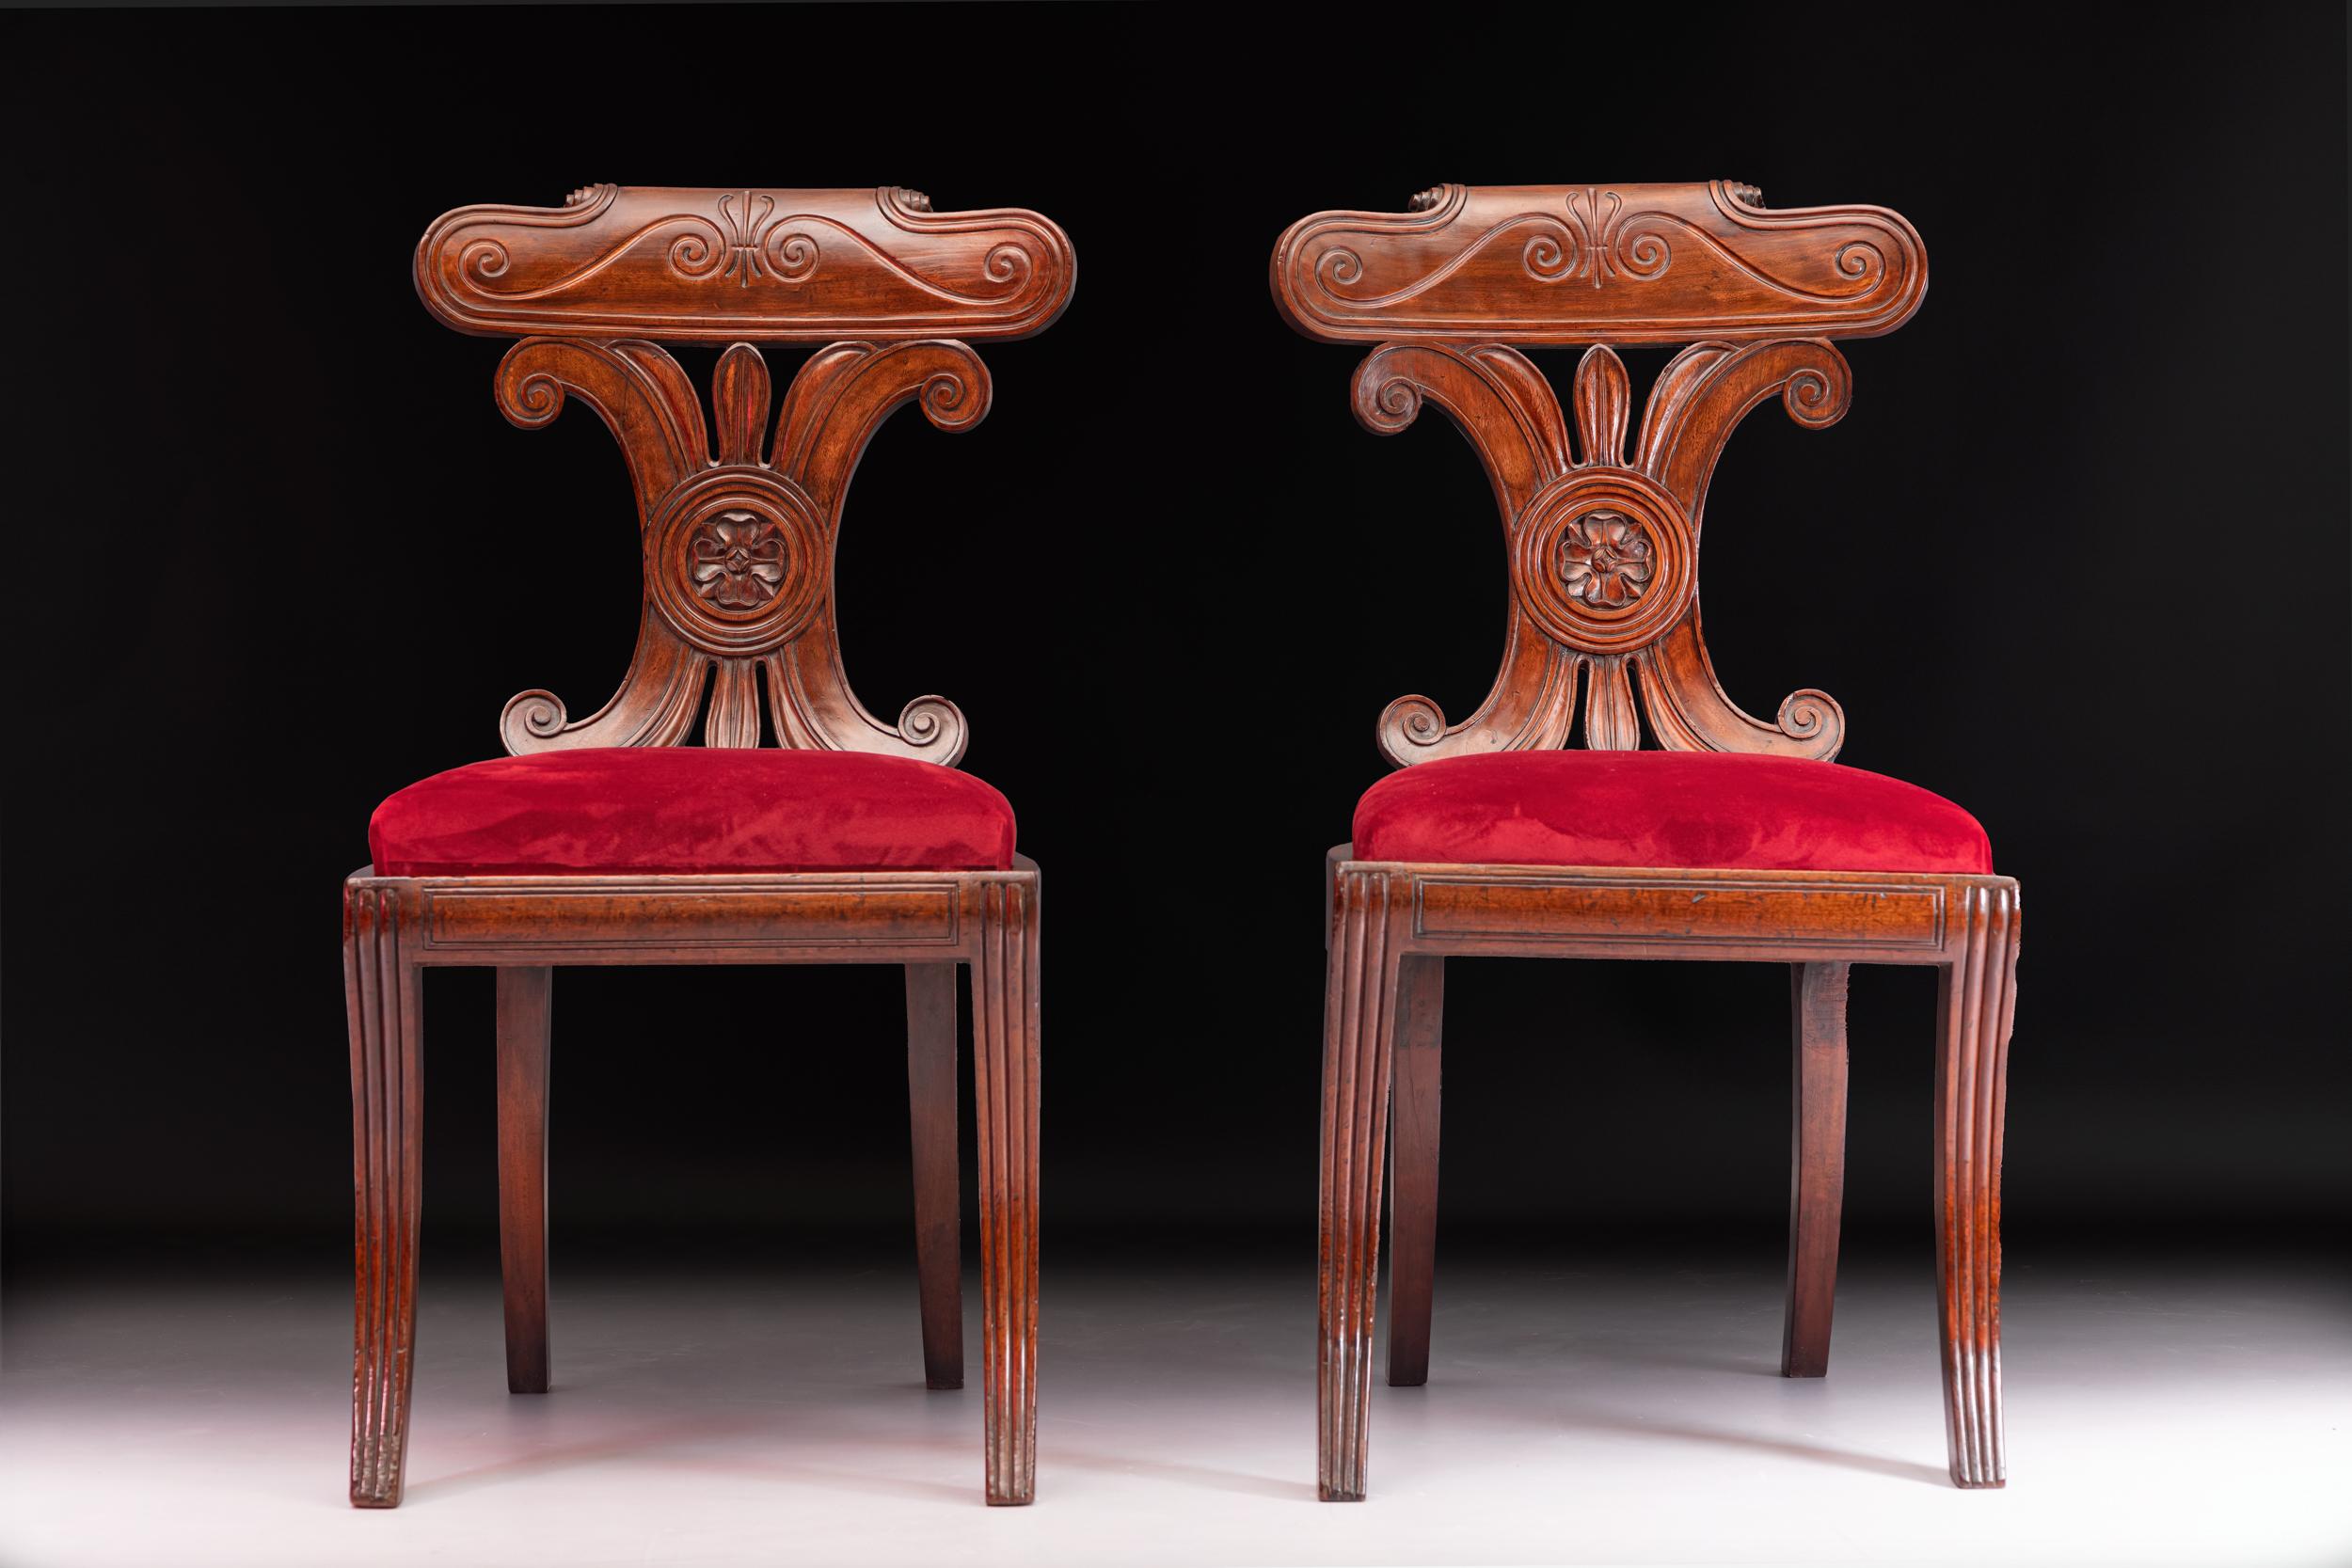 A very fine pair of Irish Regency mahogany Neo-Grecian hall chairs , with bowed tablet cresting, and conjoined c-scroll splat backs upholstered seats on ribbed sabre legs.

Circa 1820

Irish